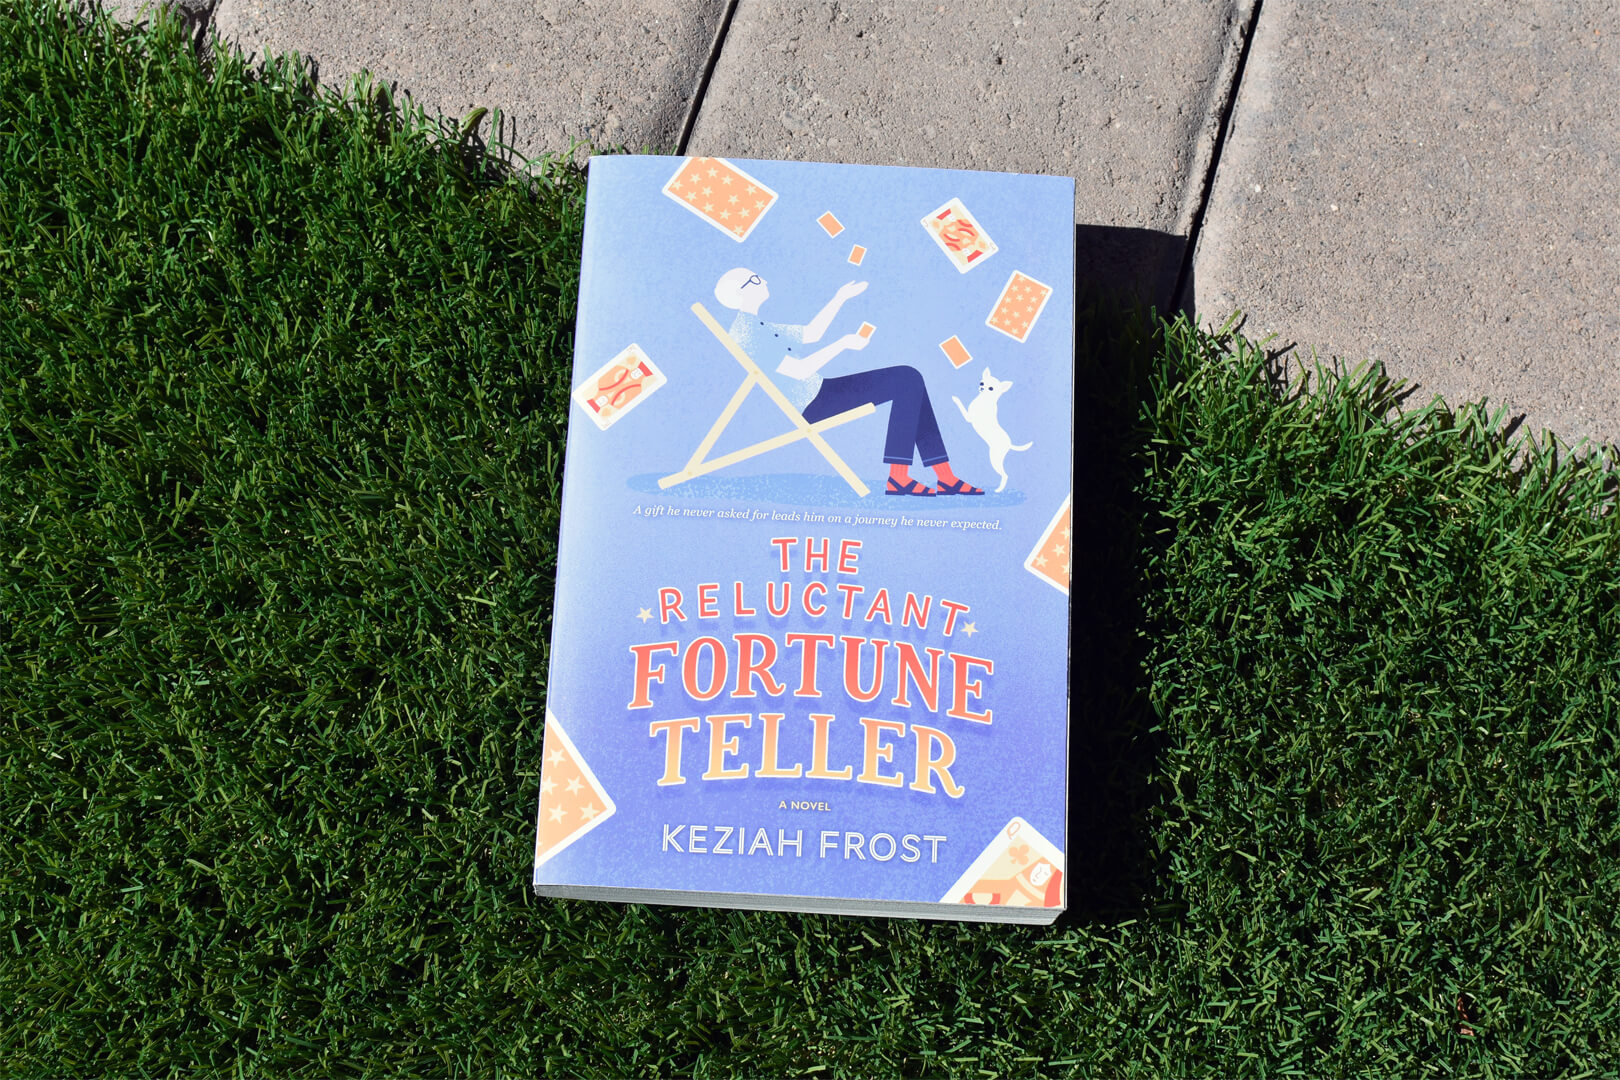 Review: The Reluctant Fortune-Teller by Keziah Frost